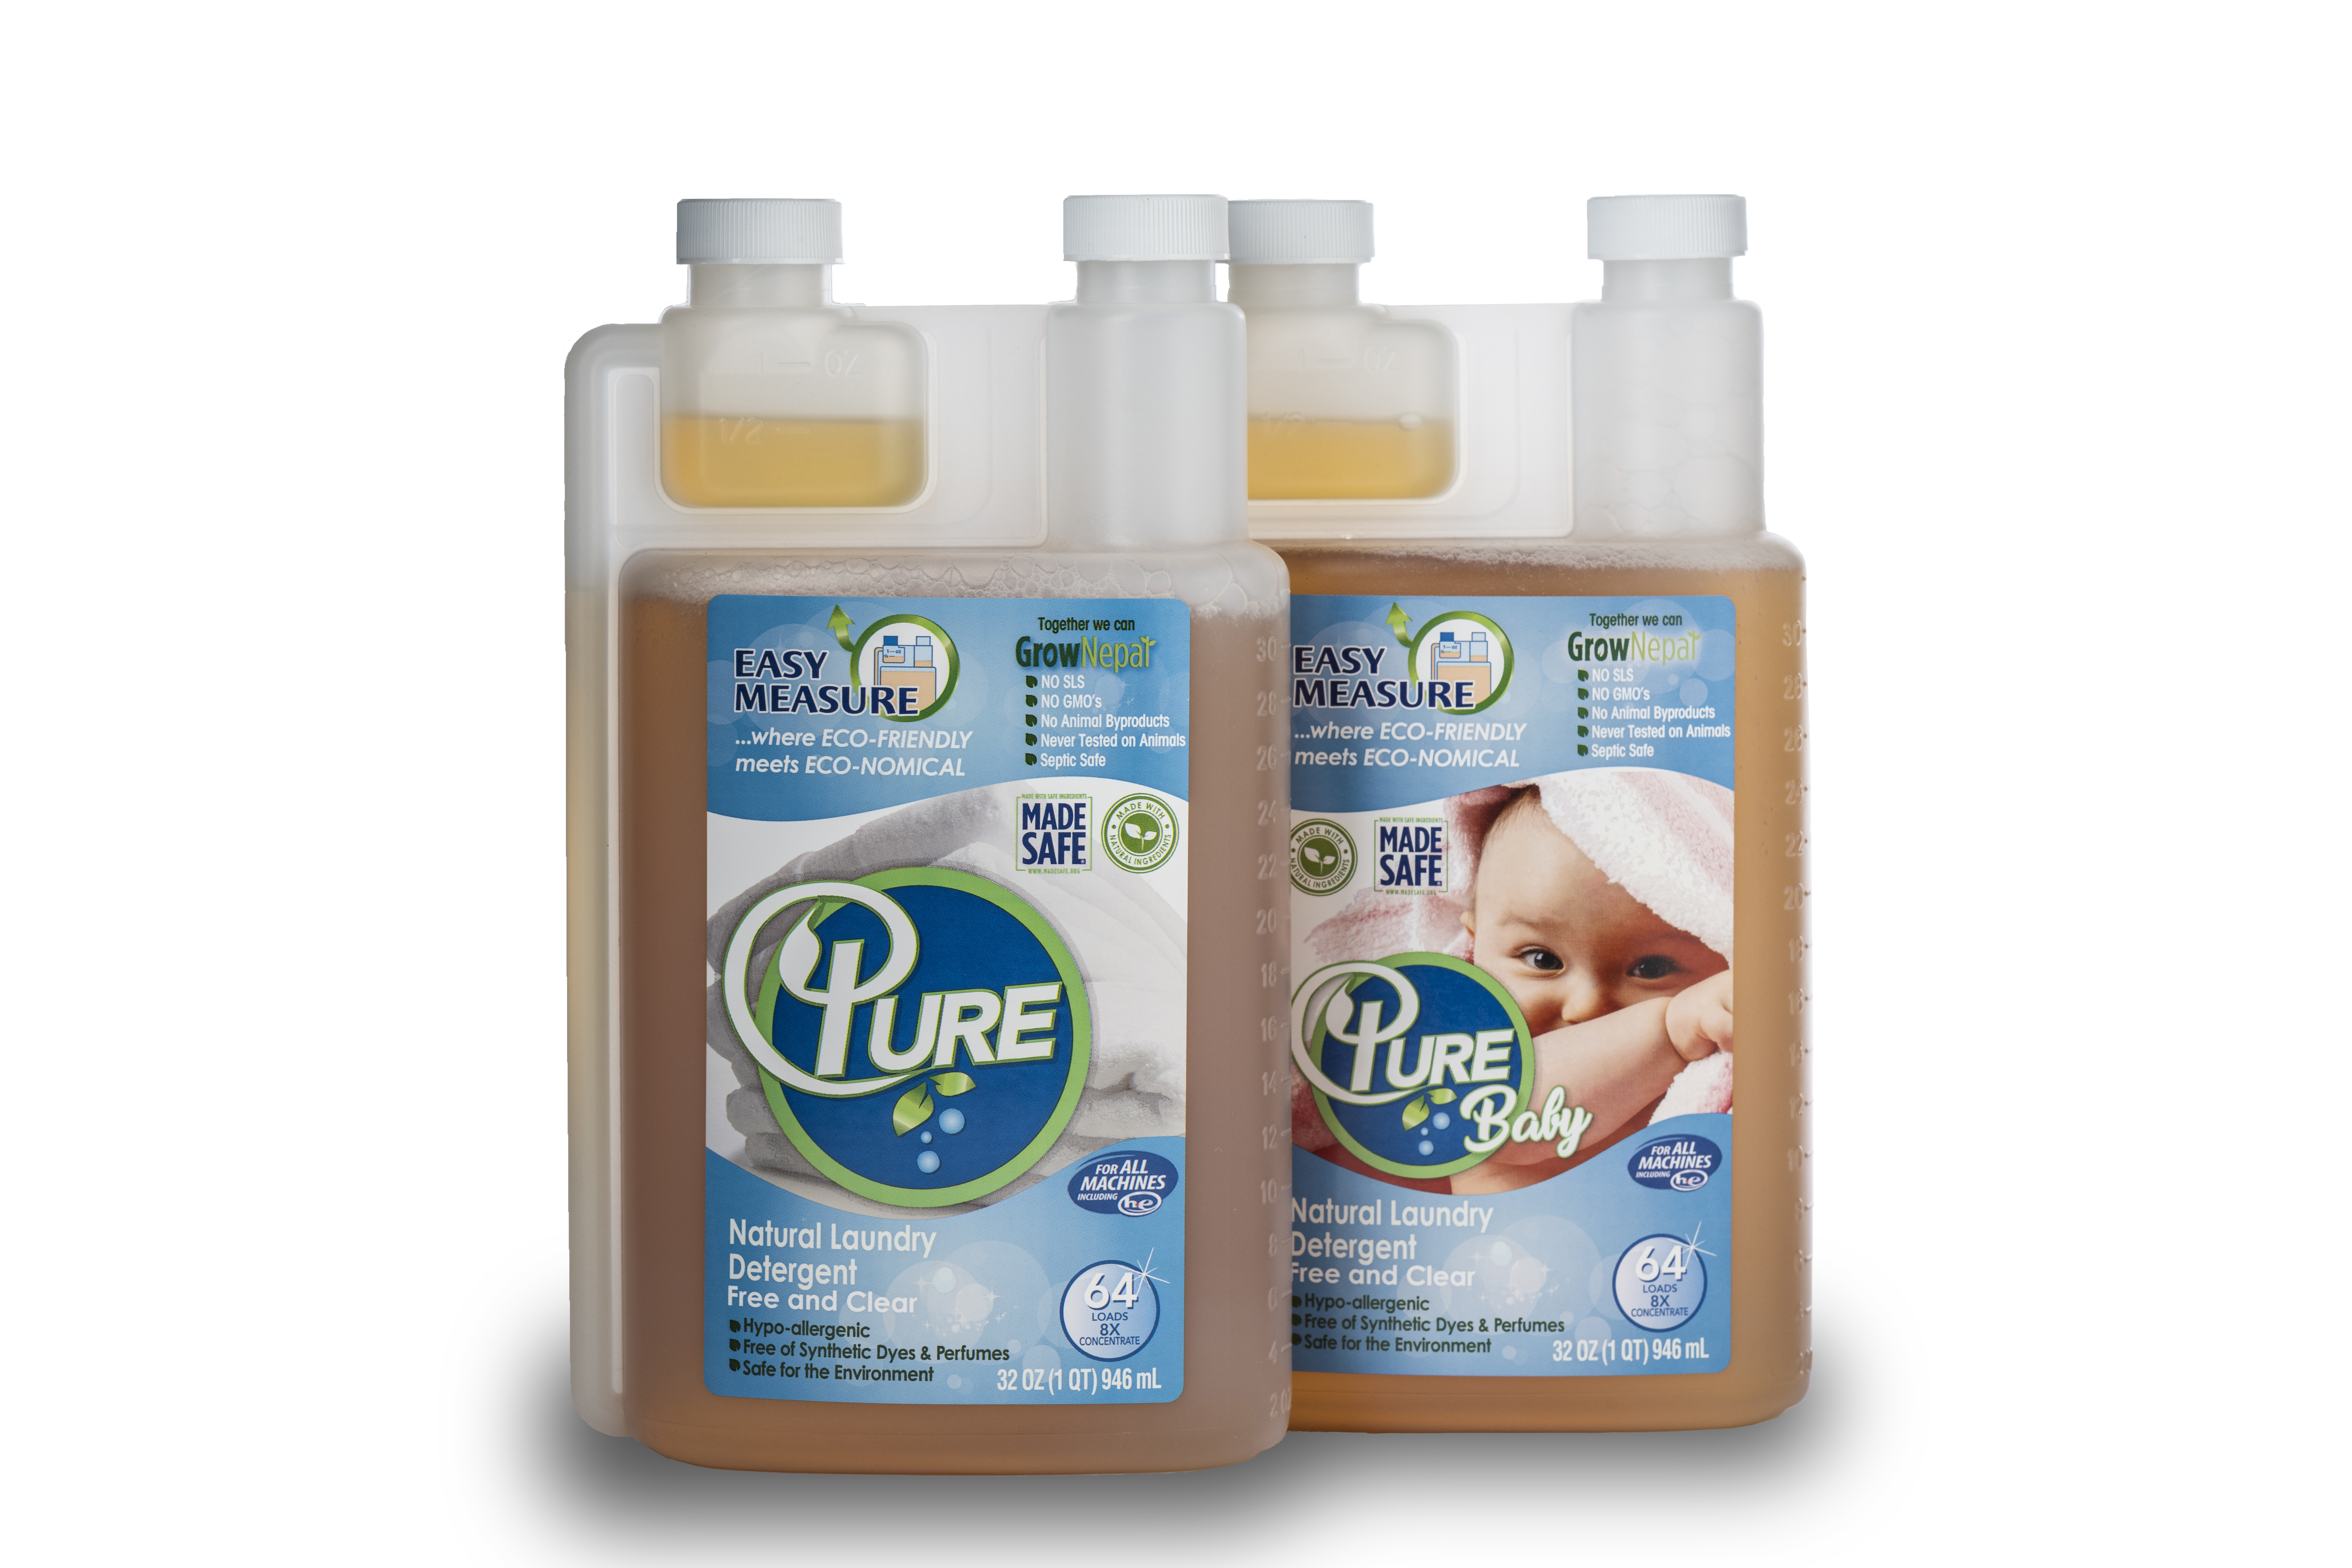 Why Use a Non-Toxic (Natural) Laundry Detergent?